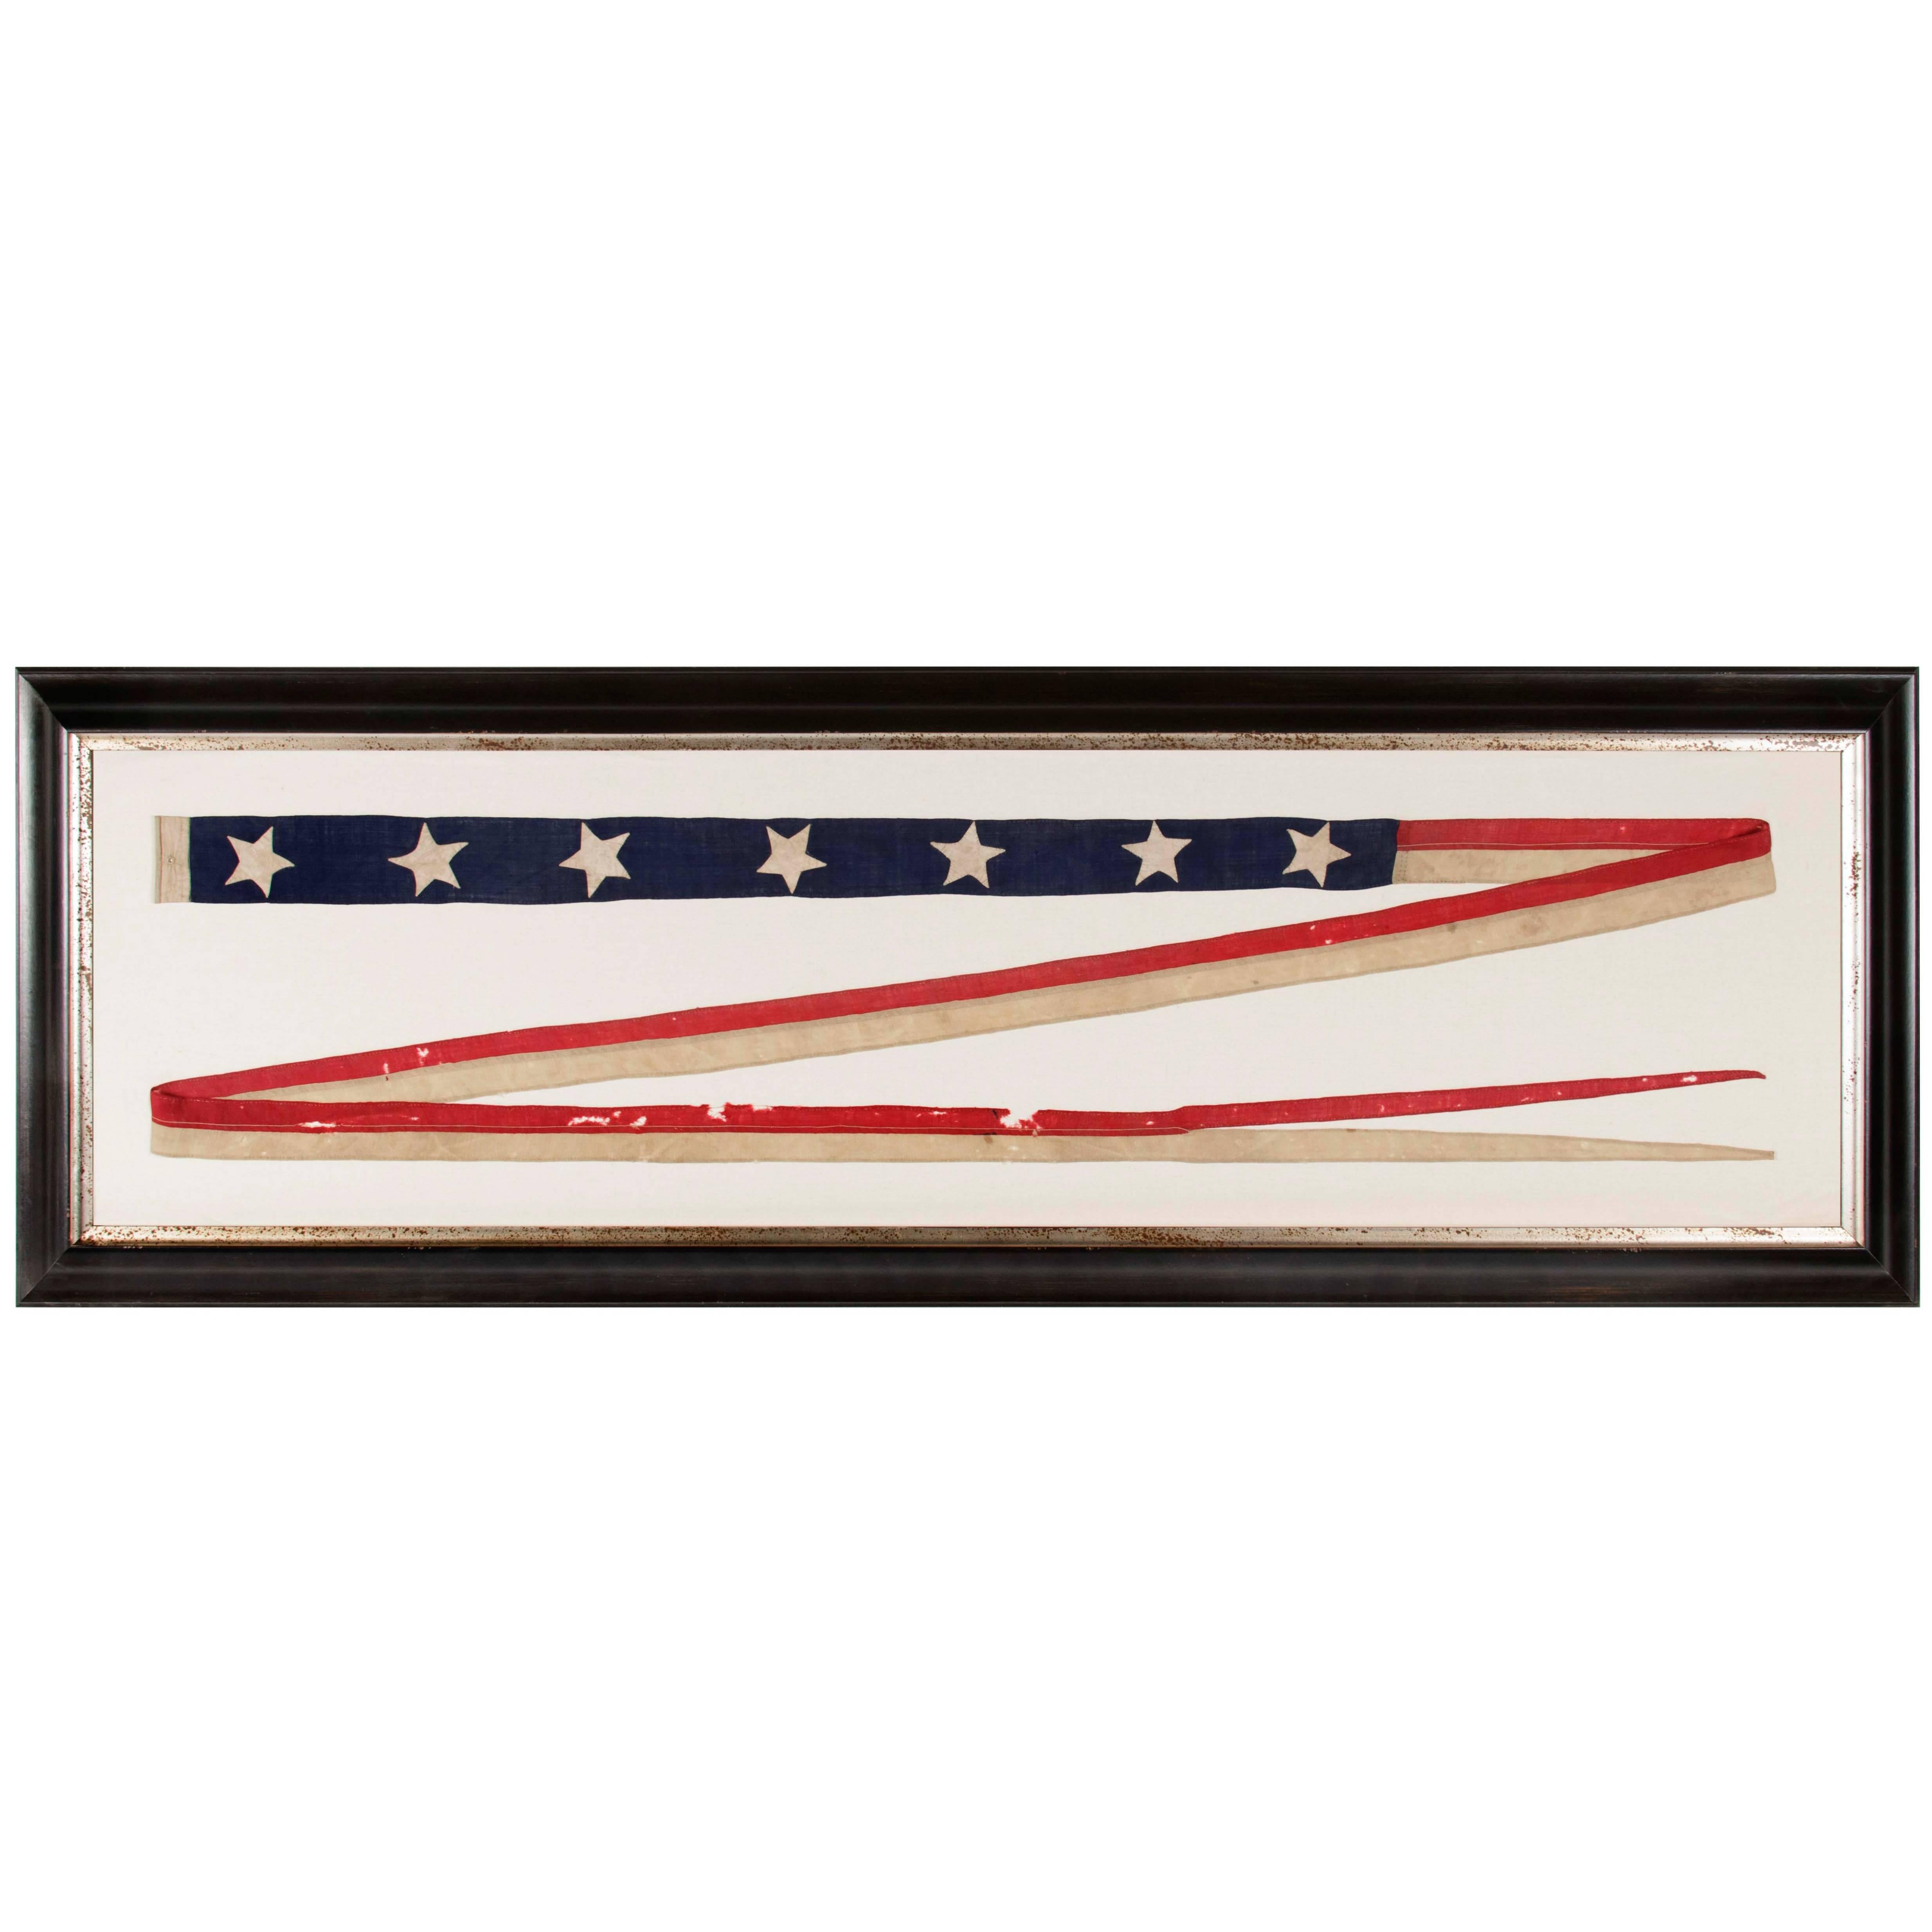 U.S. Navy Commissioning Pennant with 7 Stars